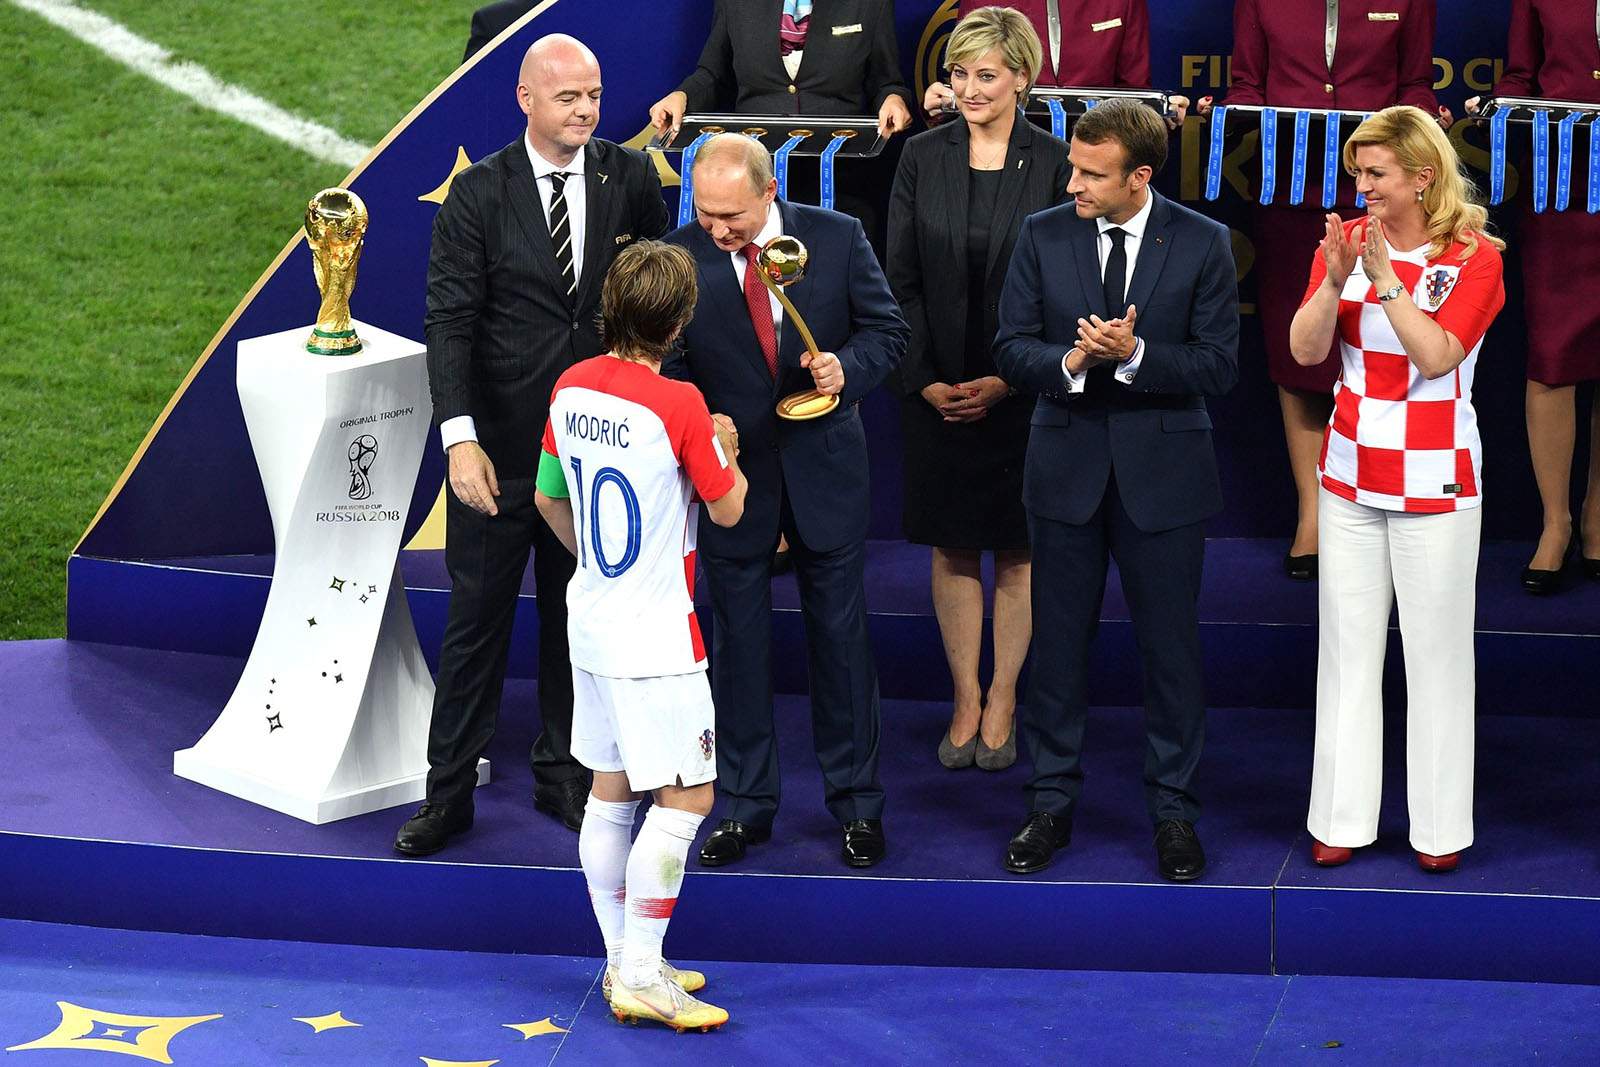 Luka Modric receives the golden ball prize at the hands of Russian President Vladimir Putin